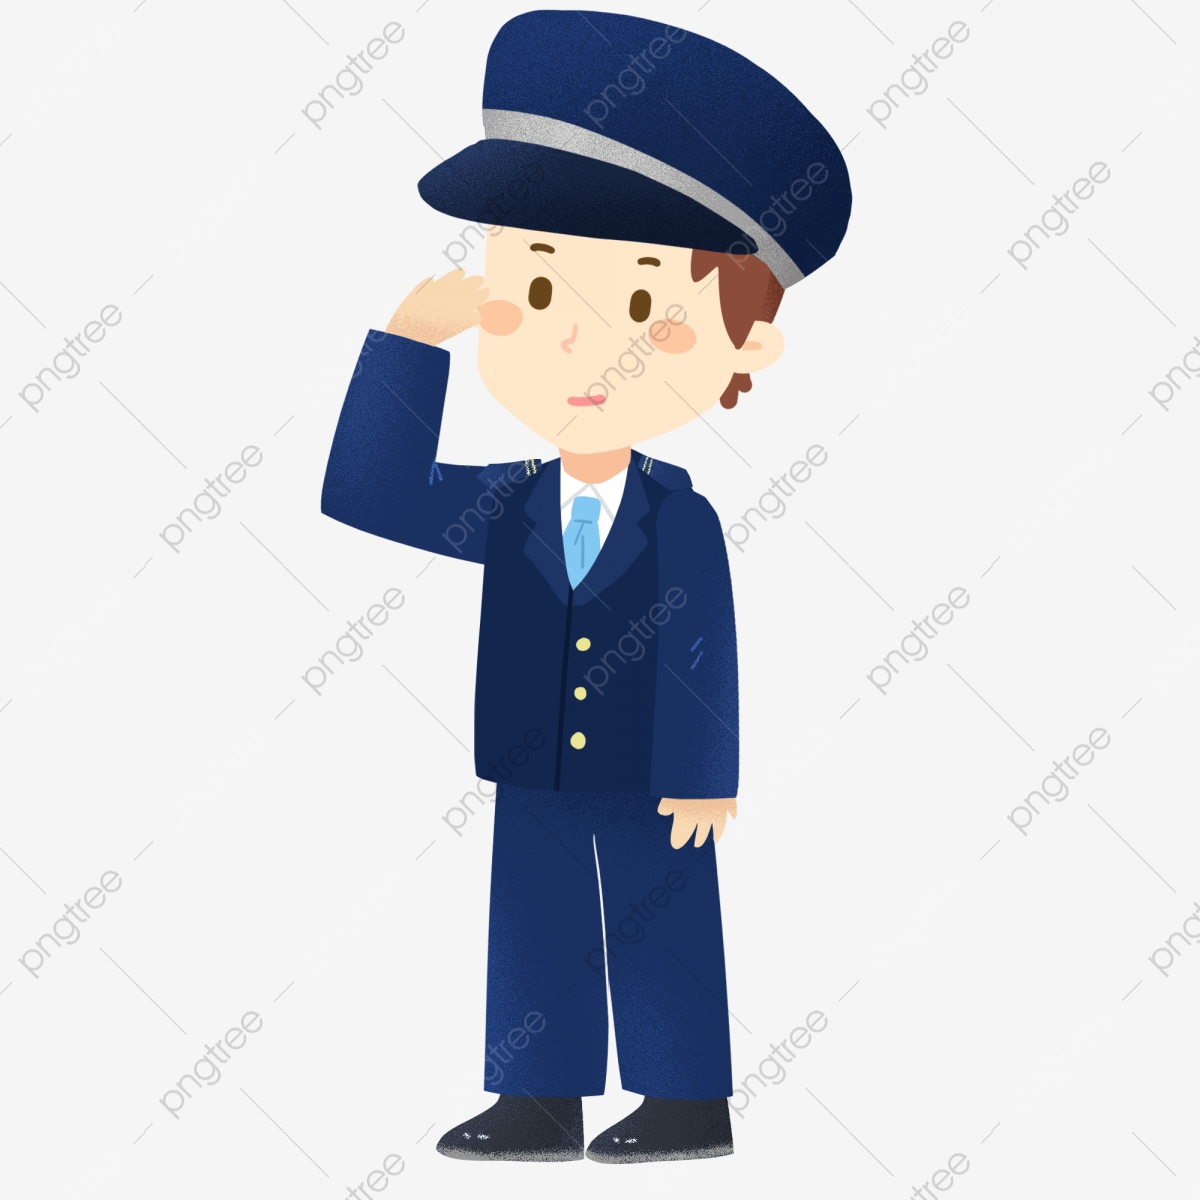 police clipart material